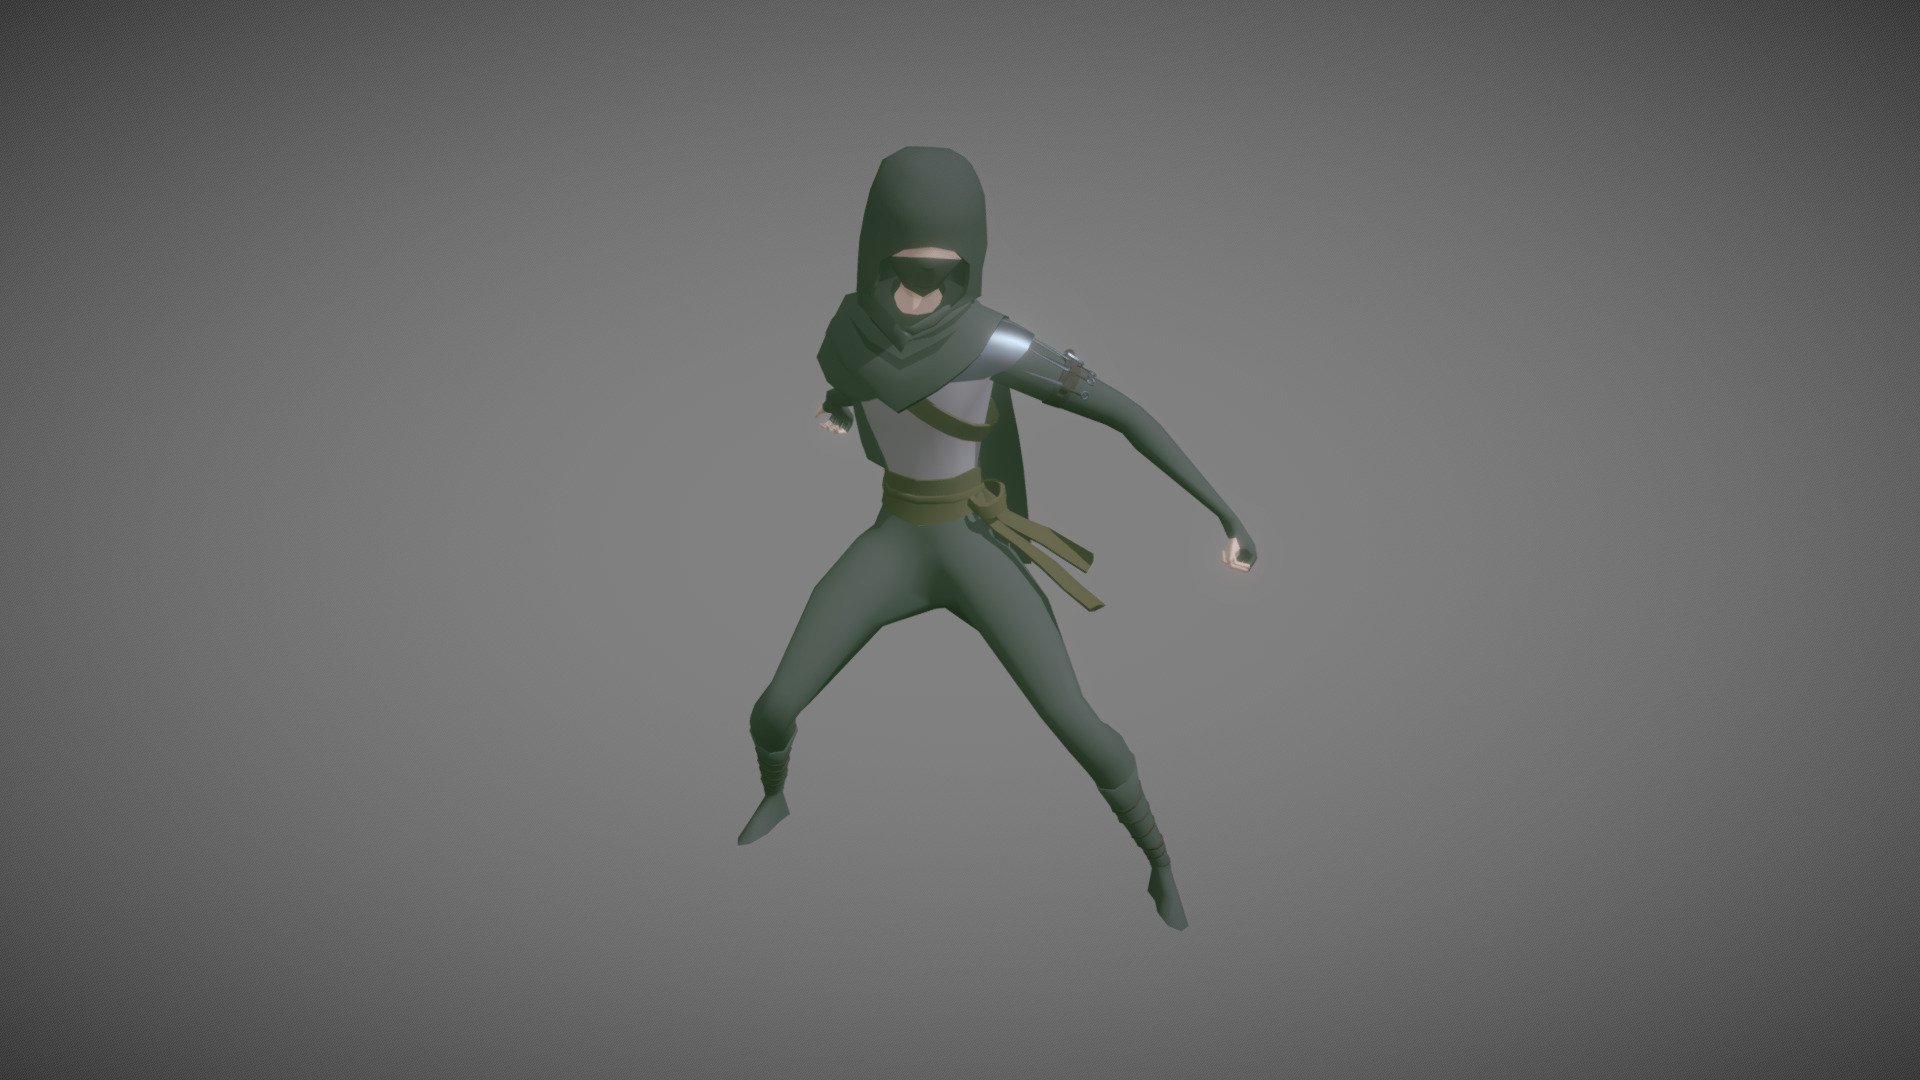 A lowpoly dude and its sword full animation moveset
All of them made in one day, so i'm pretty proud of this one (0:

This is the first low poly human i've modeled. 
The animations were inspired in the moveset of straightswords in Dark Soul.

Back when I made this, i've never tried Low poly 3D as a style, and aesthetics wise.
Since then I realized that low poly its such a great resource for a guy like me, who's trying to learn everything by itself to use it in it's own project so then can be made in lesser time than when using the &ldquo;next-gen